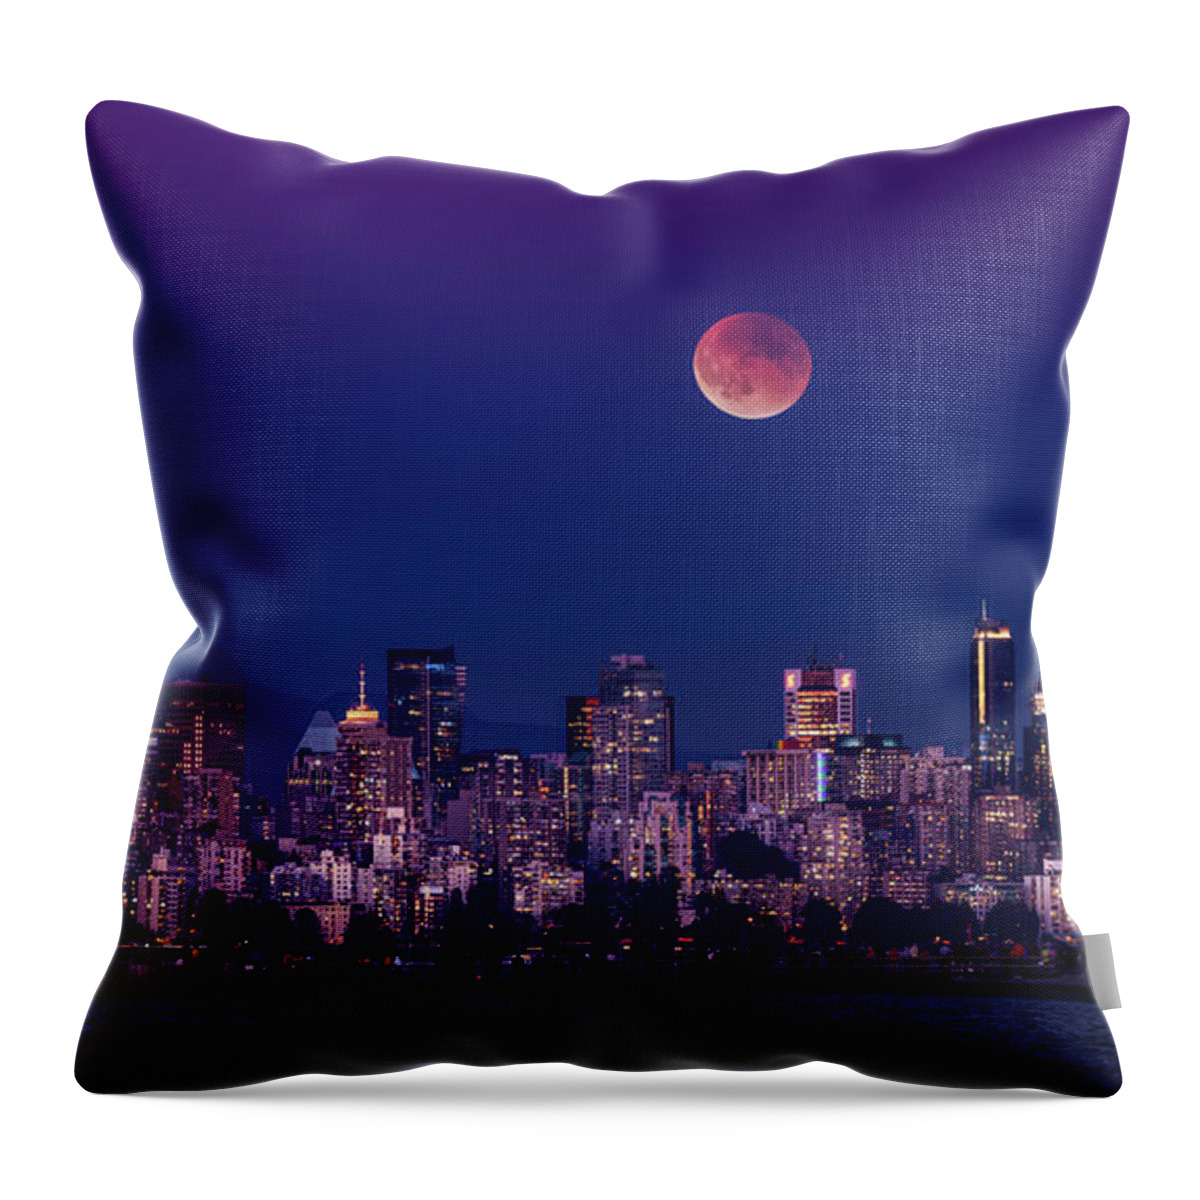 British Columbia Throw Pillow featuring the photograph Lunar Eclipse over Vancouver by Manpreet Sokhi